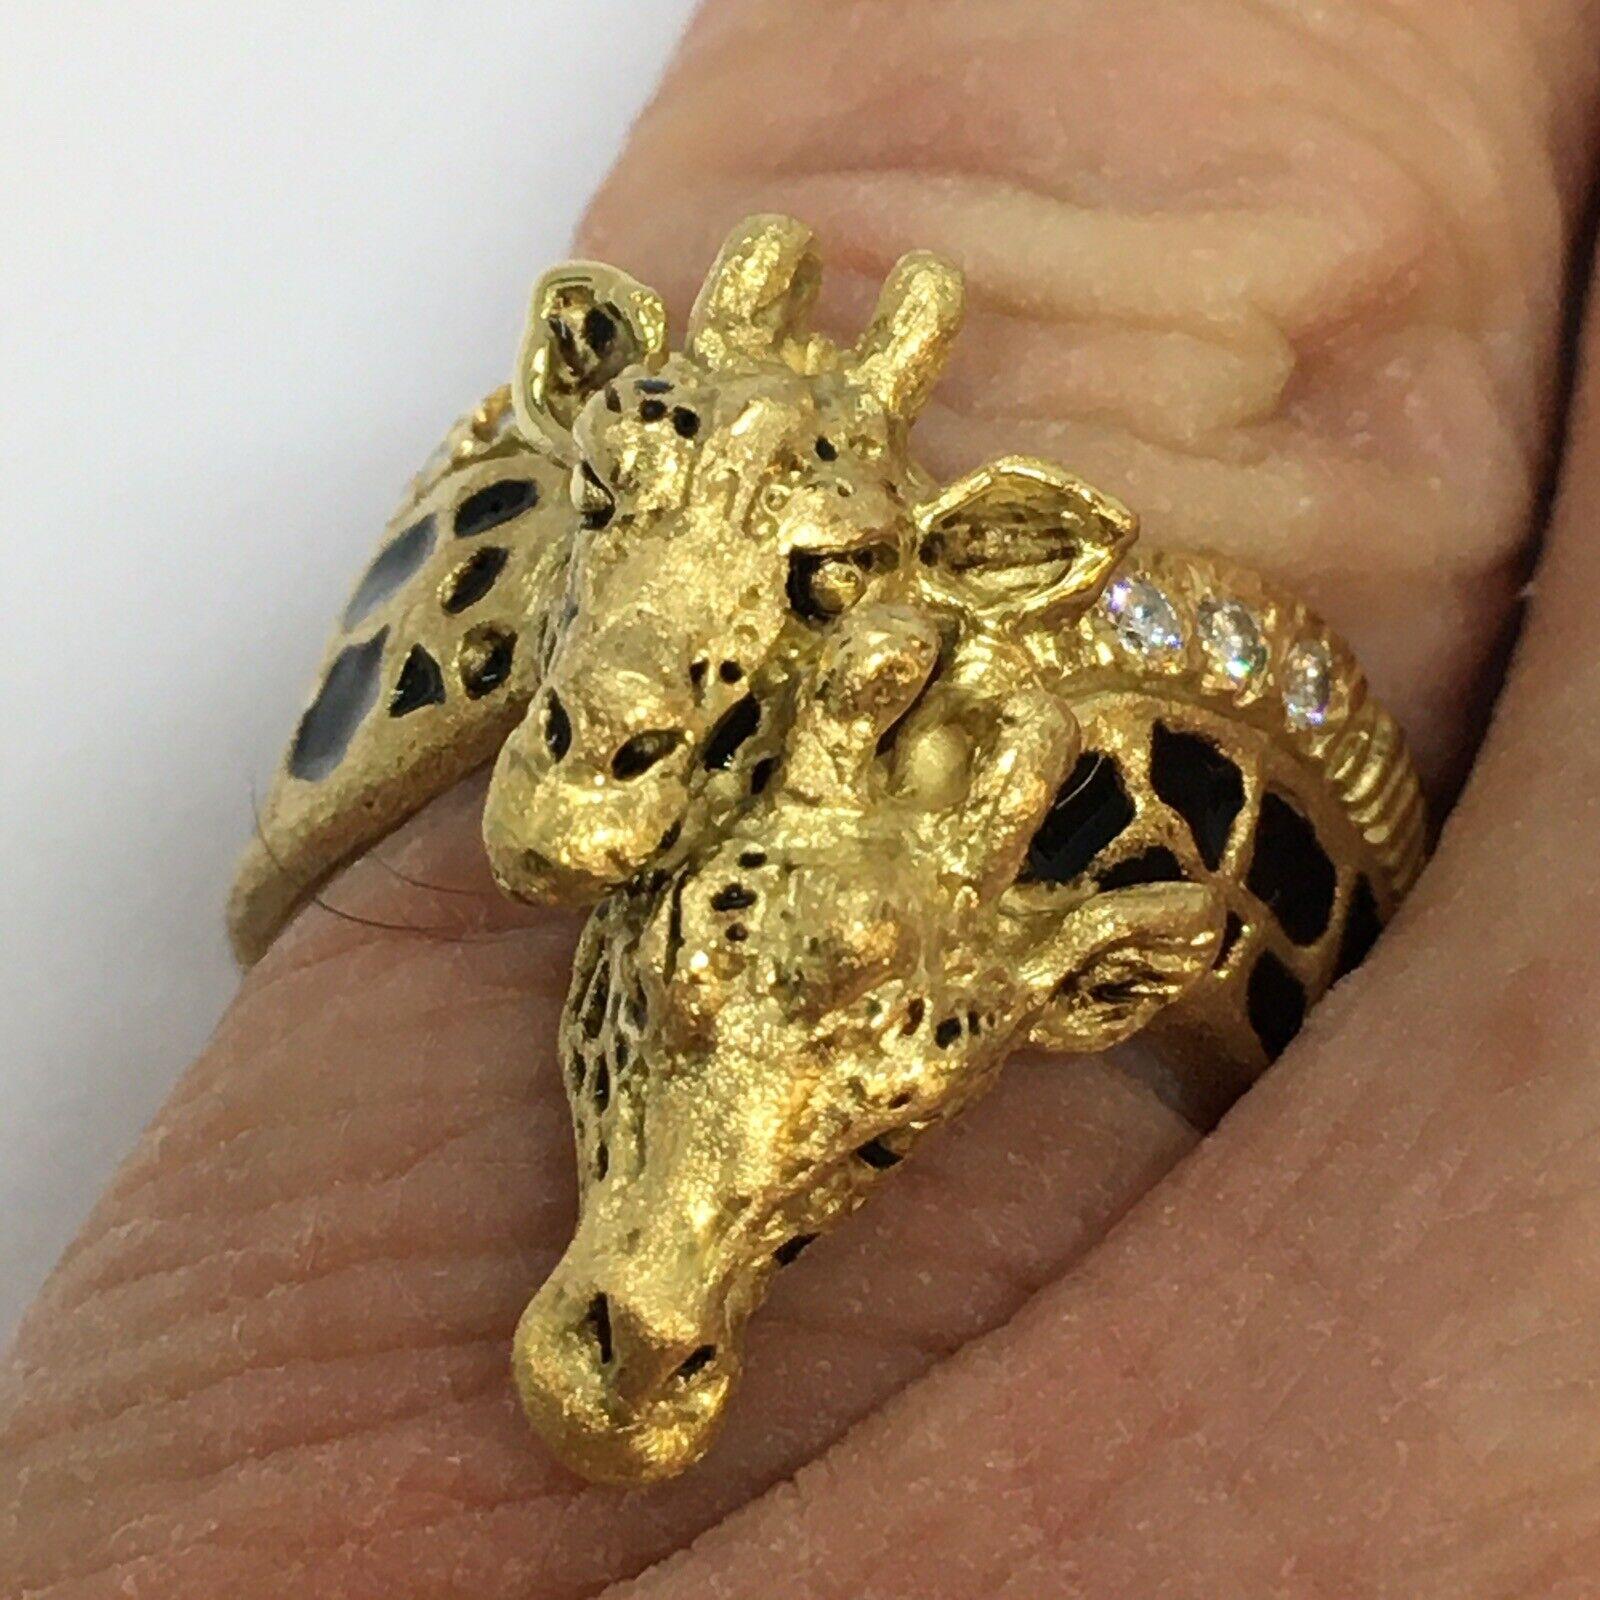 
G & G Appleby 18 Karat Yellow Gold Diamond and Enamel Double Giraffe Ring


Gregory A. Appleby born in Van Nuys, Ca. He partnered with Gayle Bright and began sculpting precious metal jewelry. Their work has been featured in many galleries.  Gayle